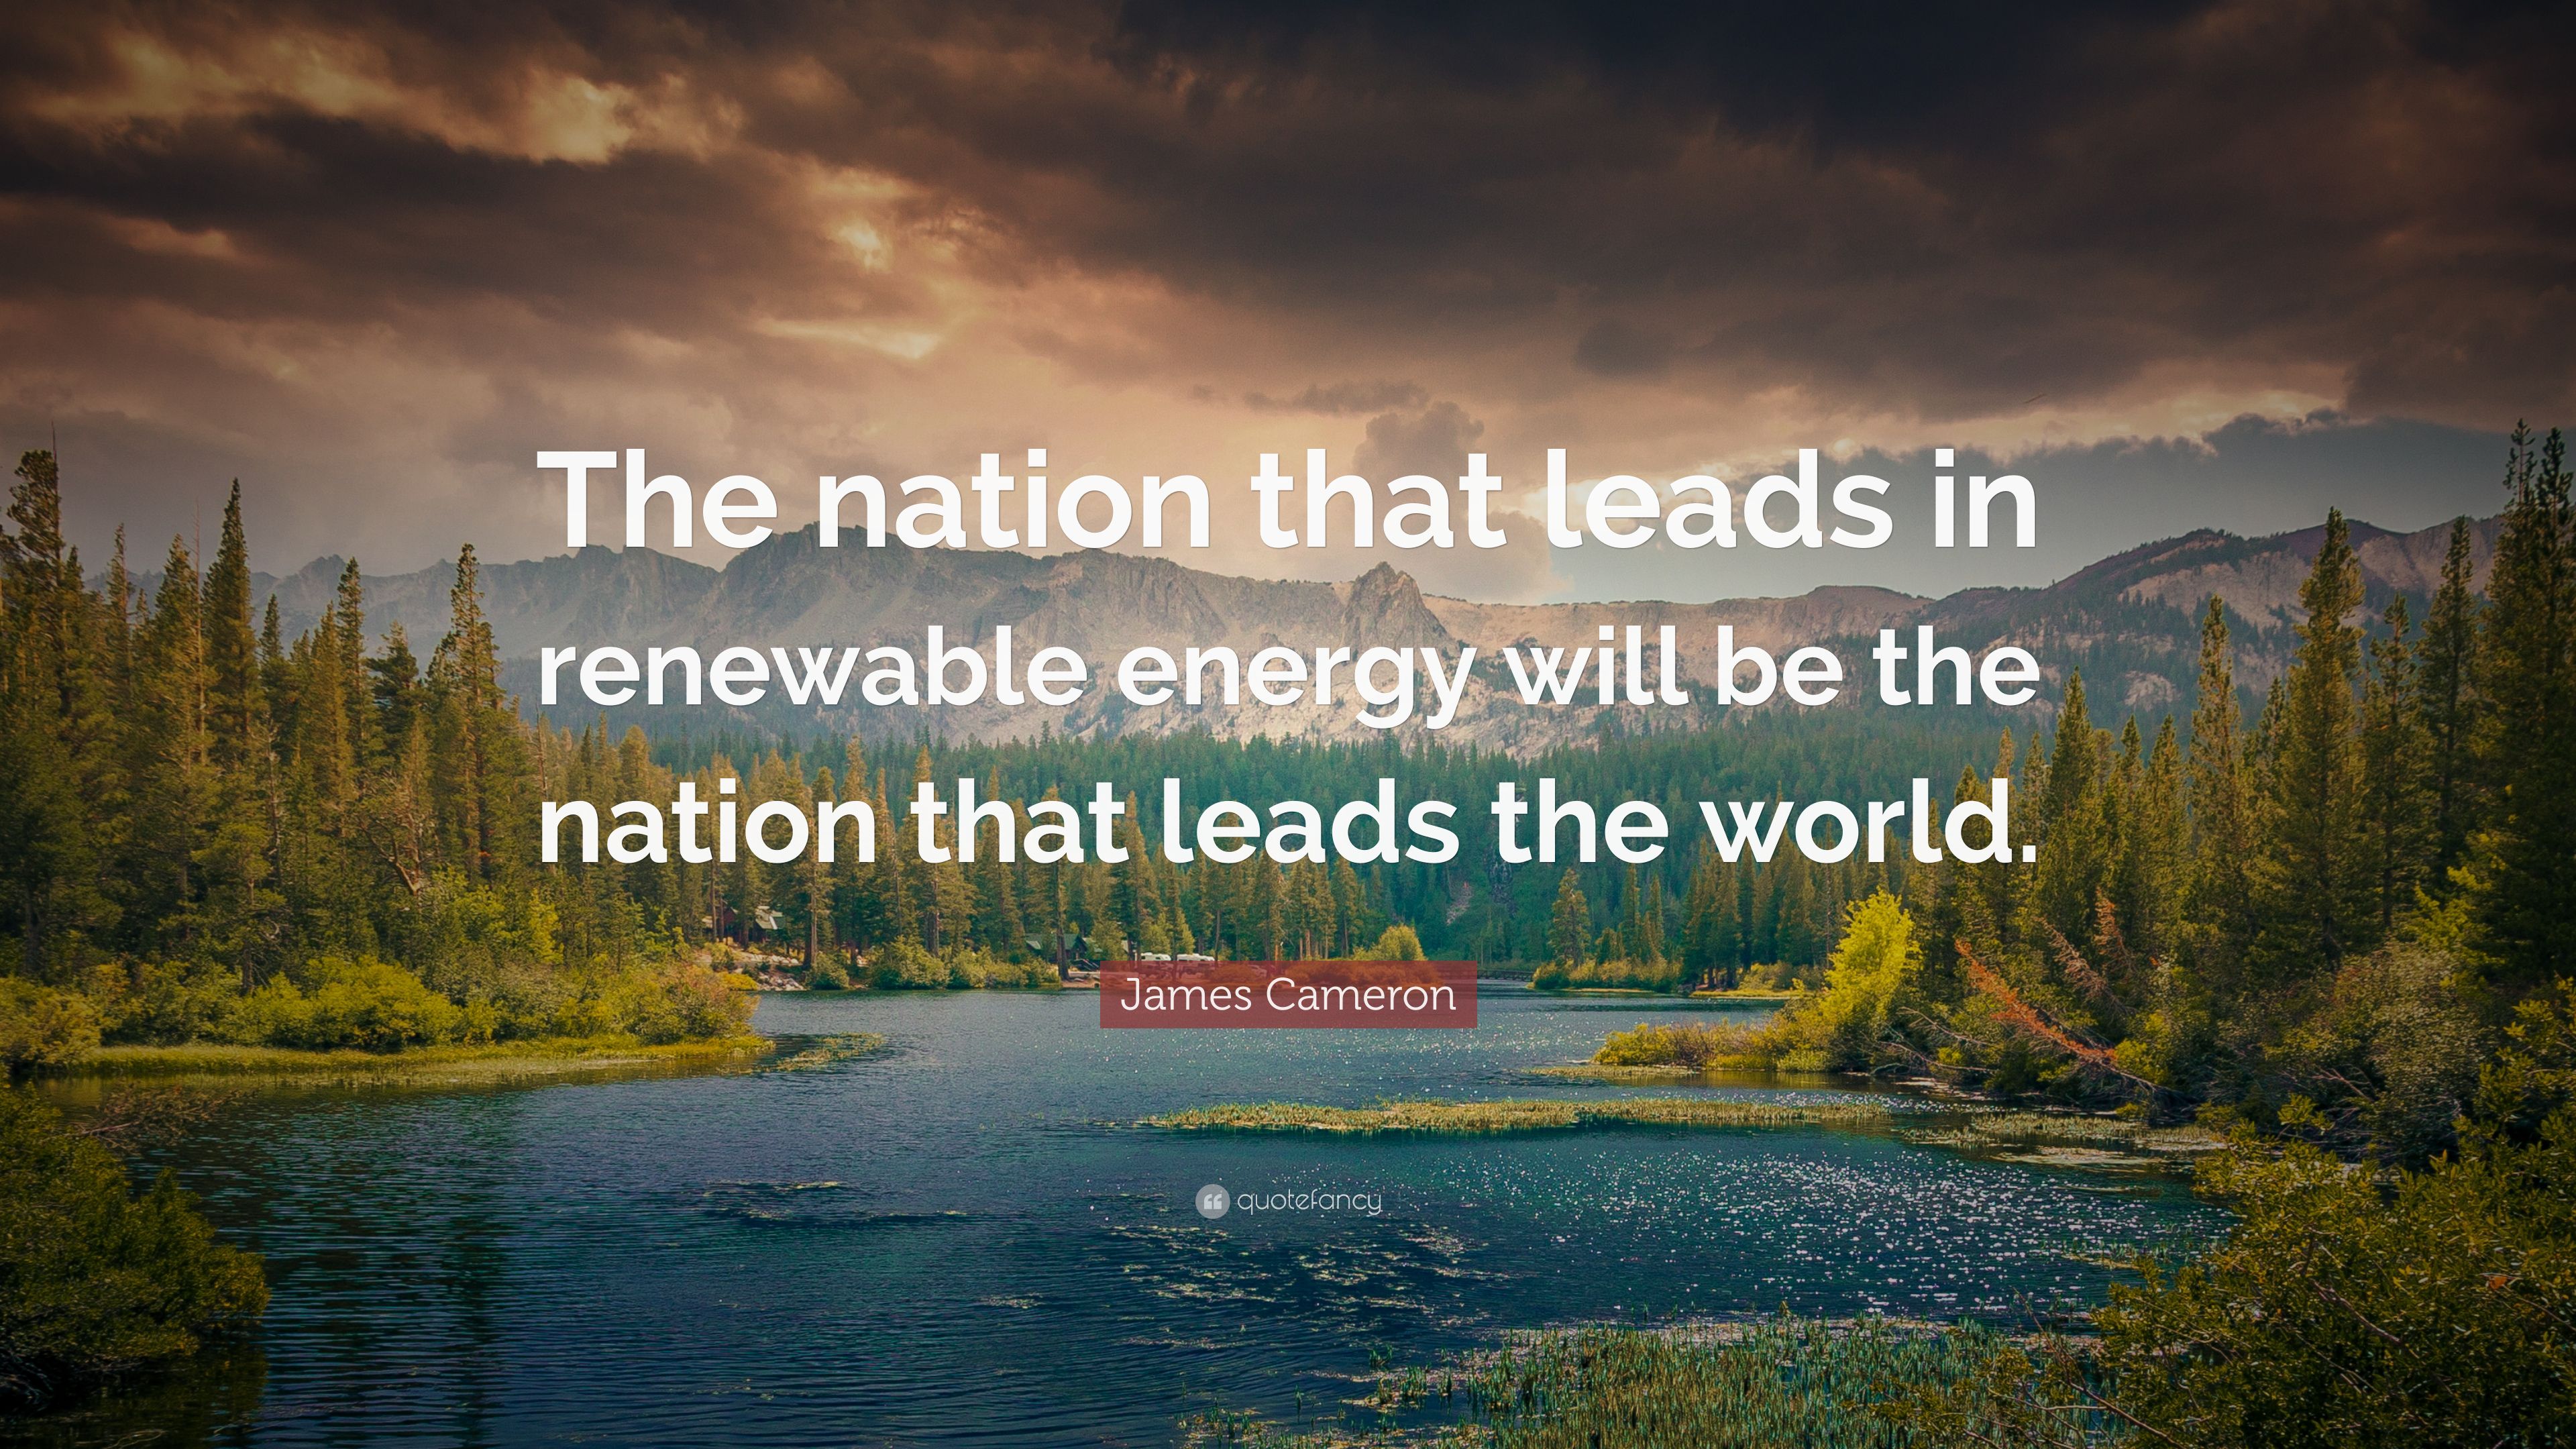 James Cameron Quote: “The nation that leads in renewable energy